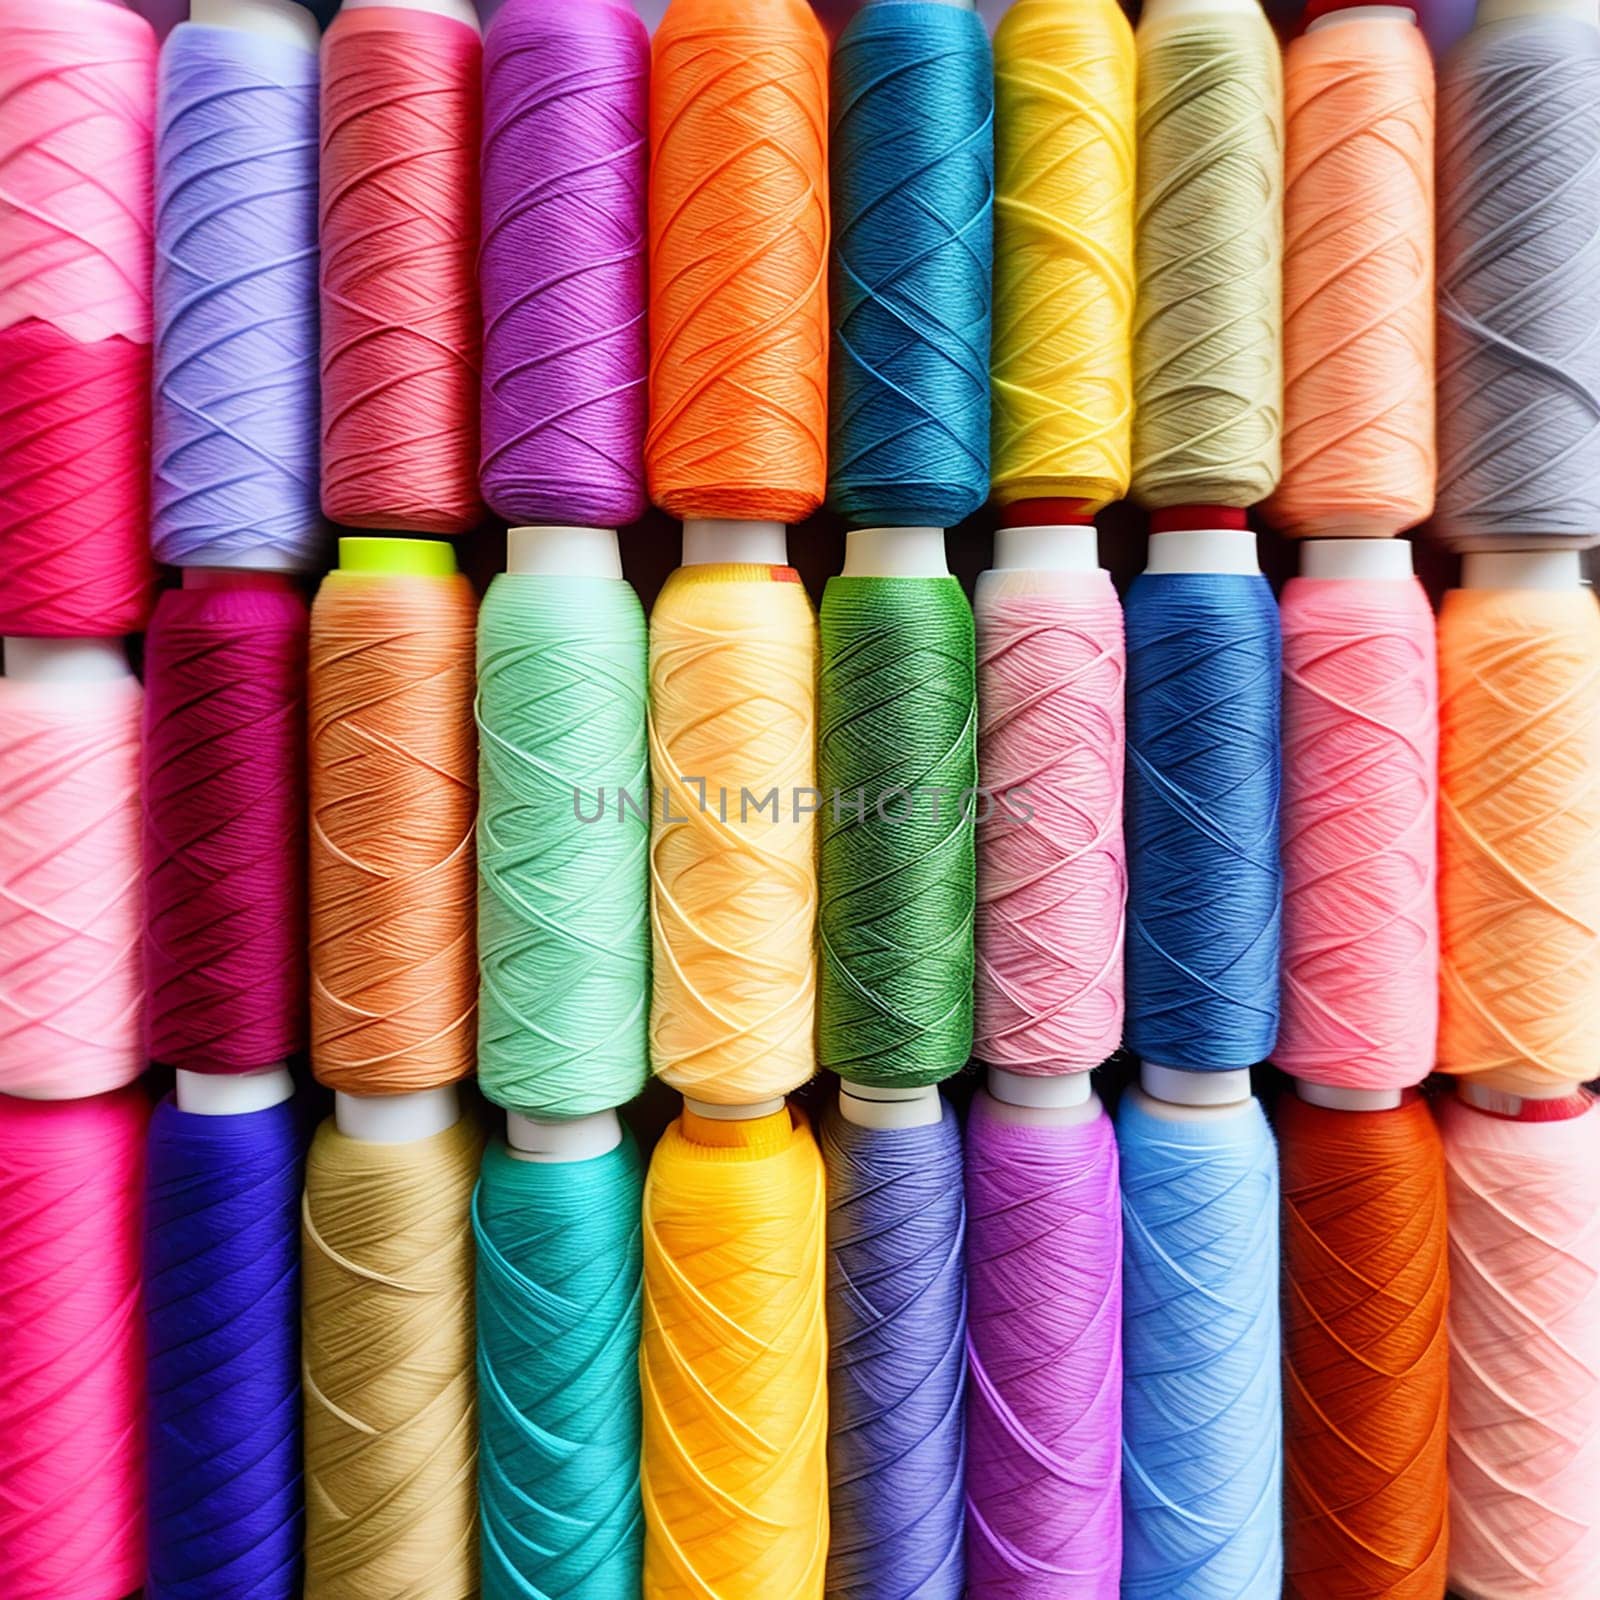 Colorful Sewing Threads on a White Background by Petrichor